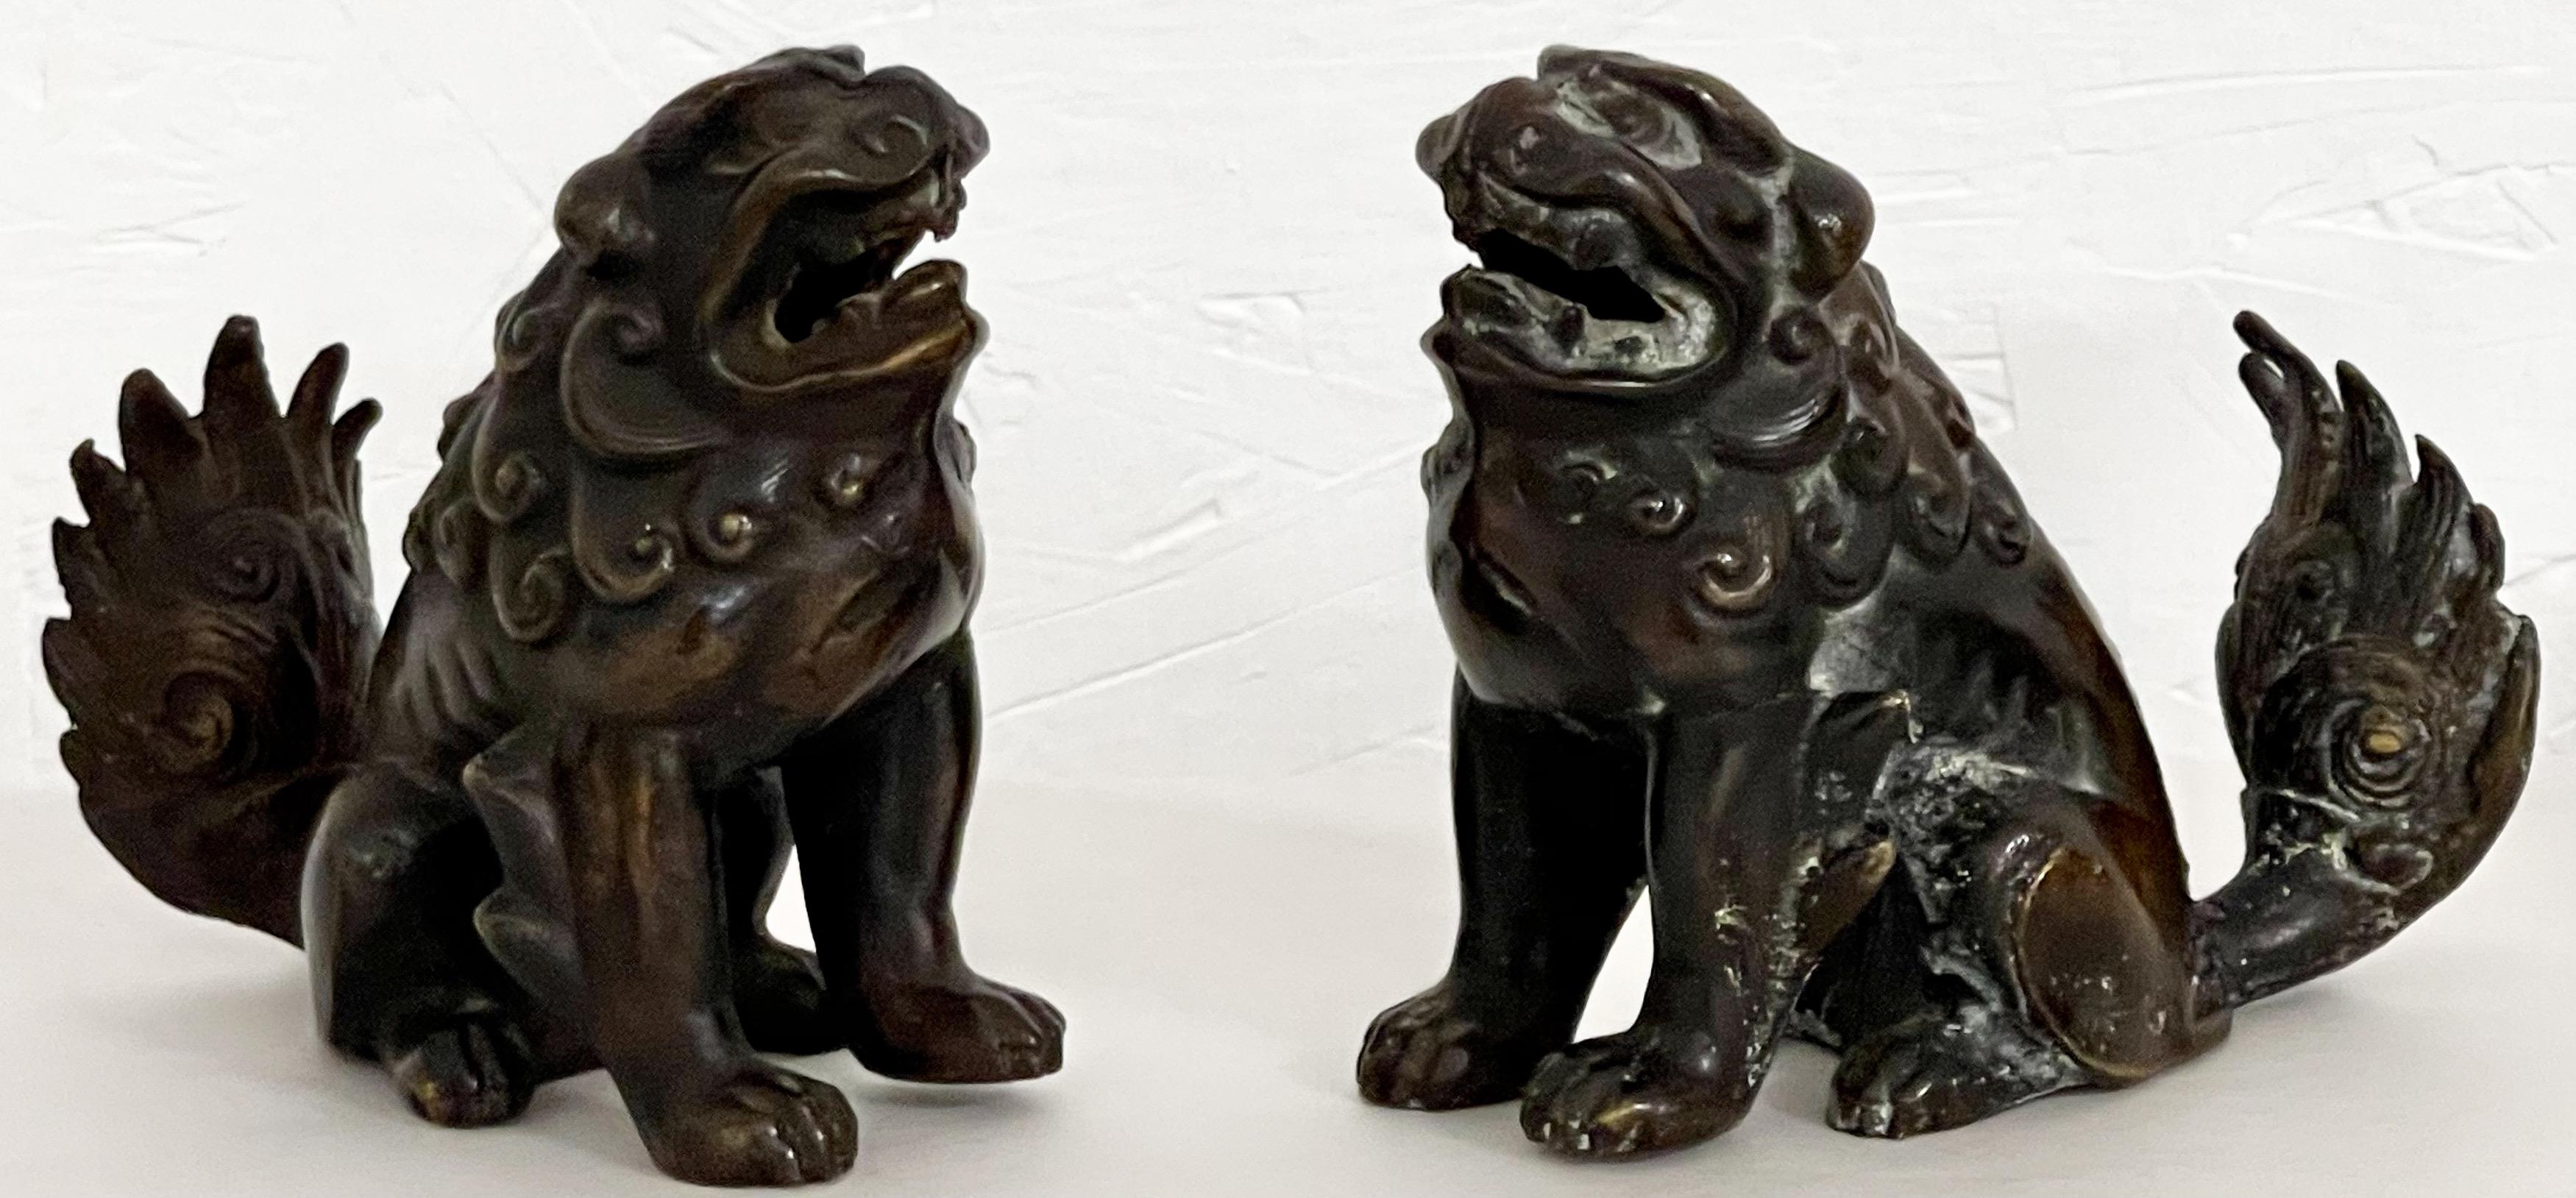 These are a pair of early 20th century Chinese bronze foo dogs. They are a heavy casting and in very good condition.